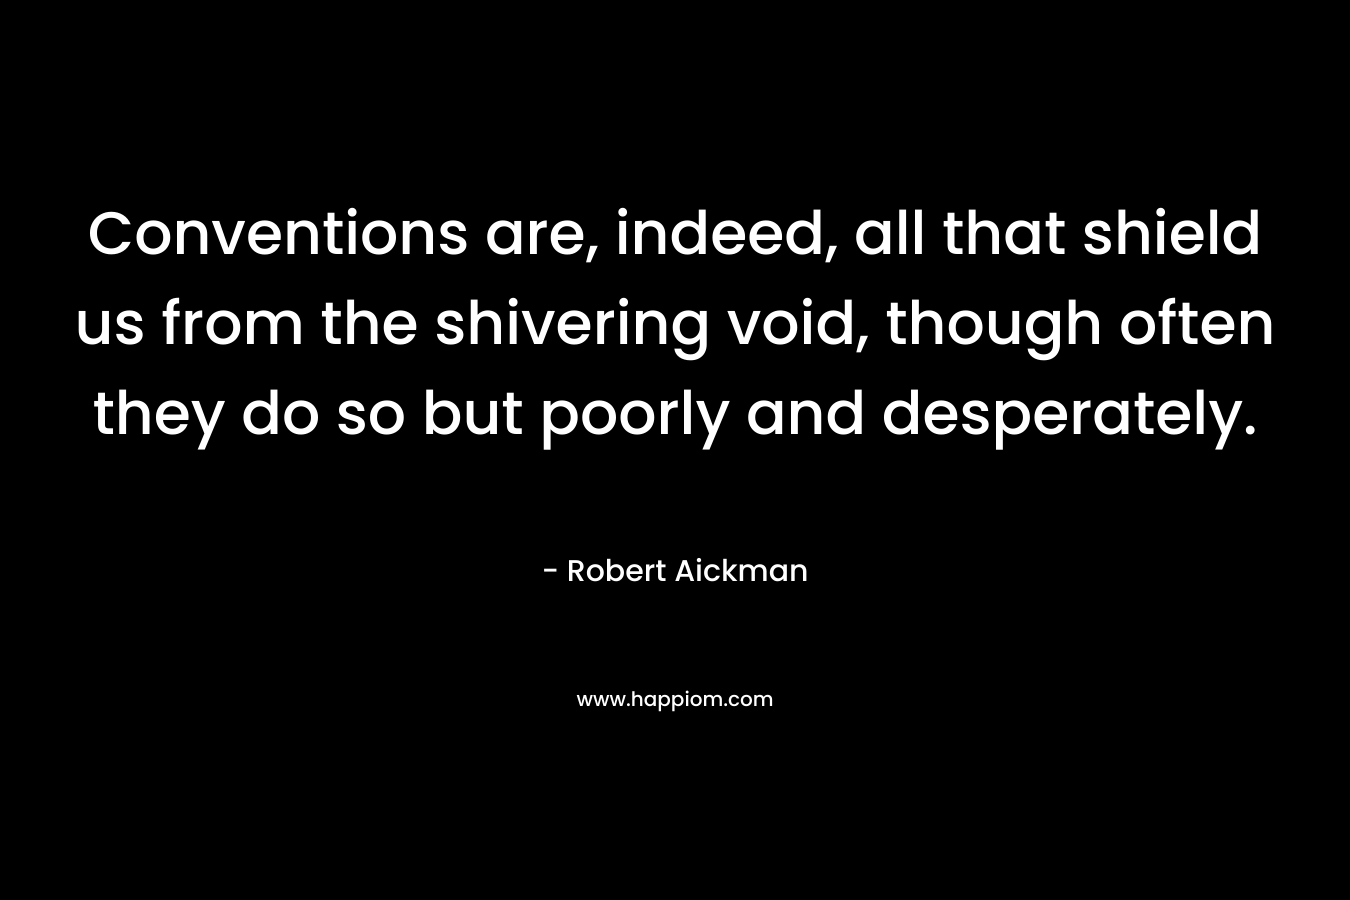 Conventions are, indeed, all that shield us from the shivering void, though often they do so but poorly and desperately. – Robert Aickman